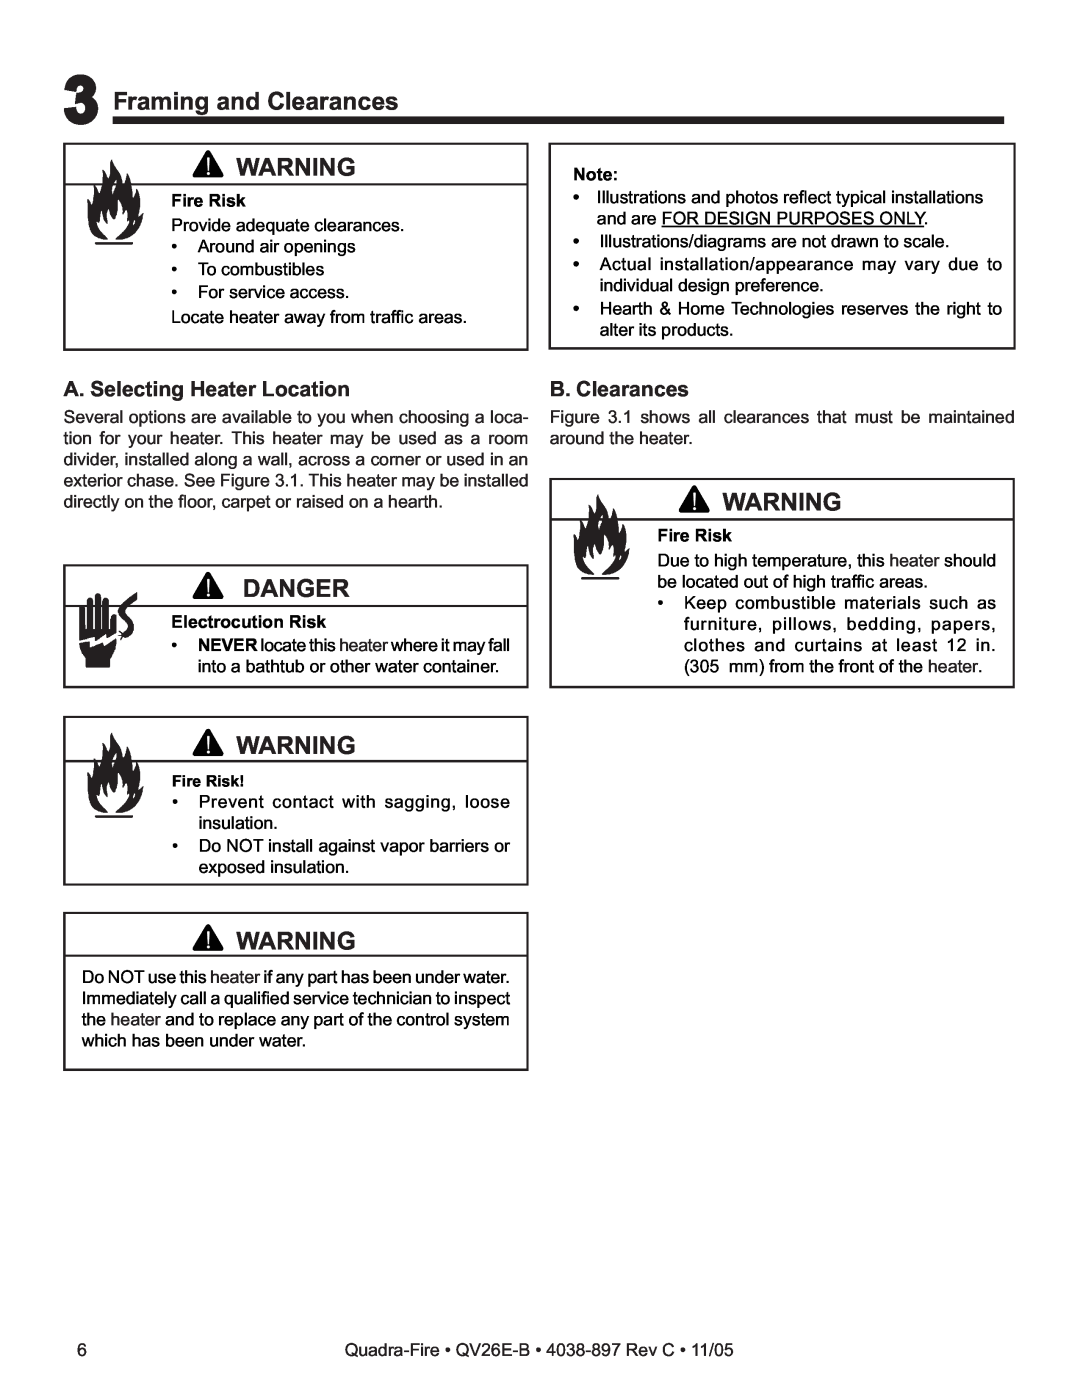 Quadra-Fire QV26E-B owner manual 3Framing and Clearances, Danger, A. Selecting Heater Location, B. Clearances, Fire Risk 